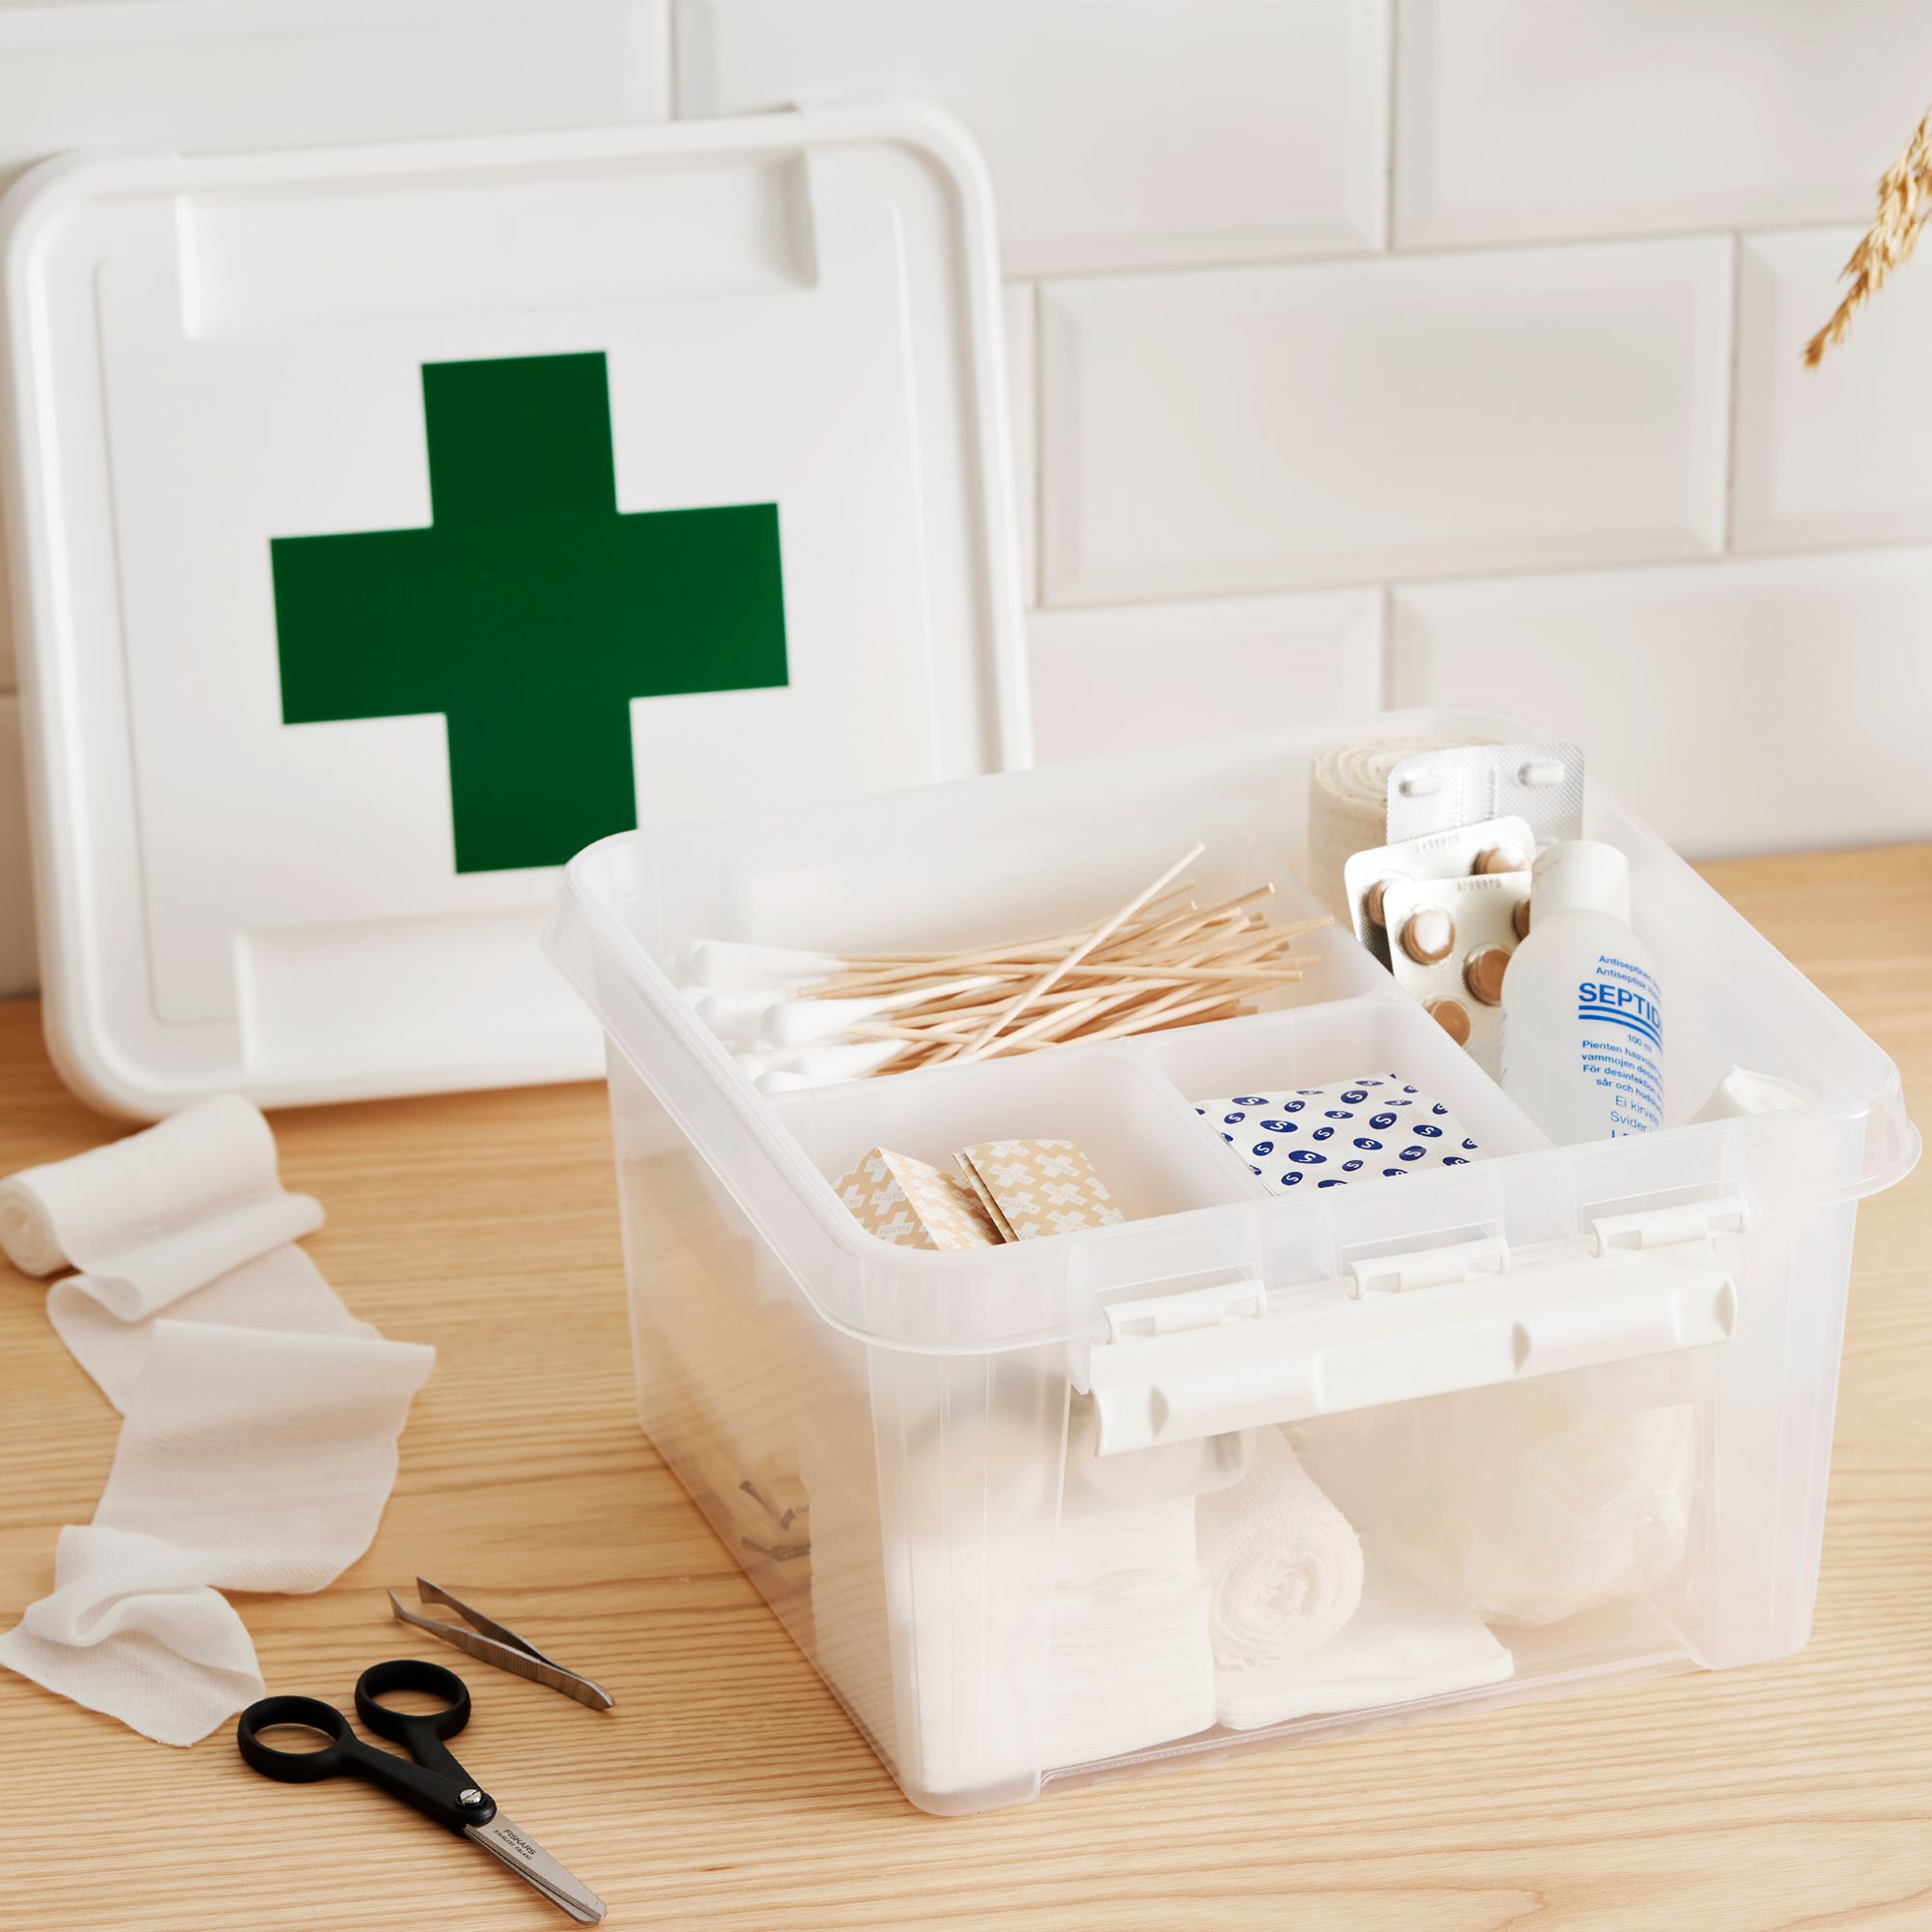 How To Store Medical Supplies At Home